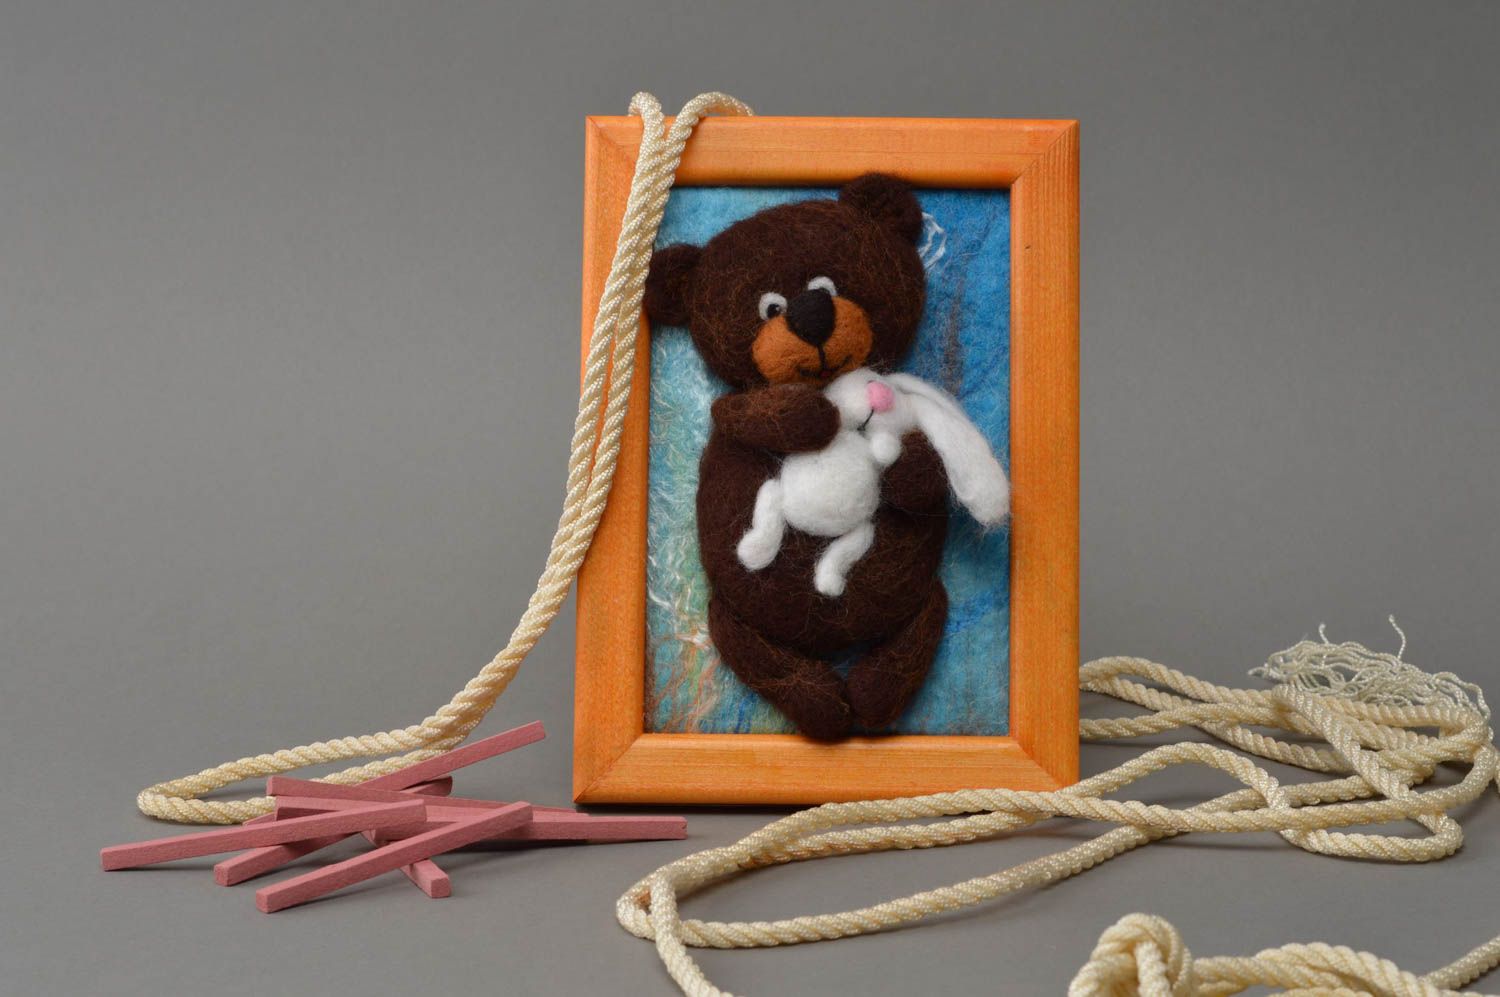 Handmade picture in frame nursery decor table decor woolen toy for children photo 1